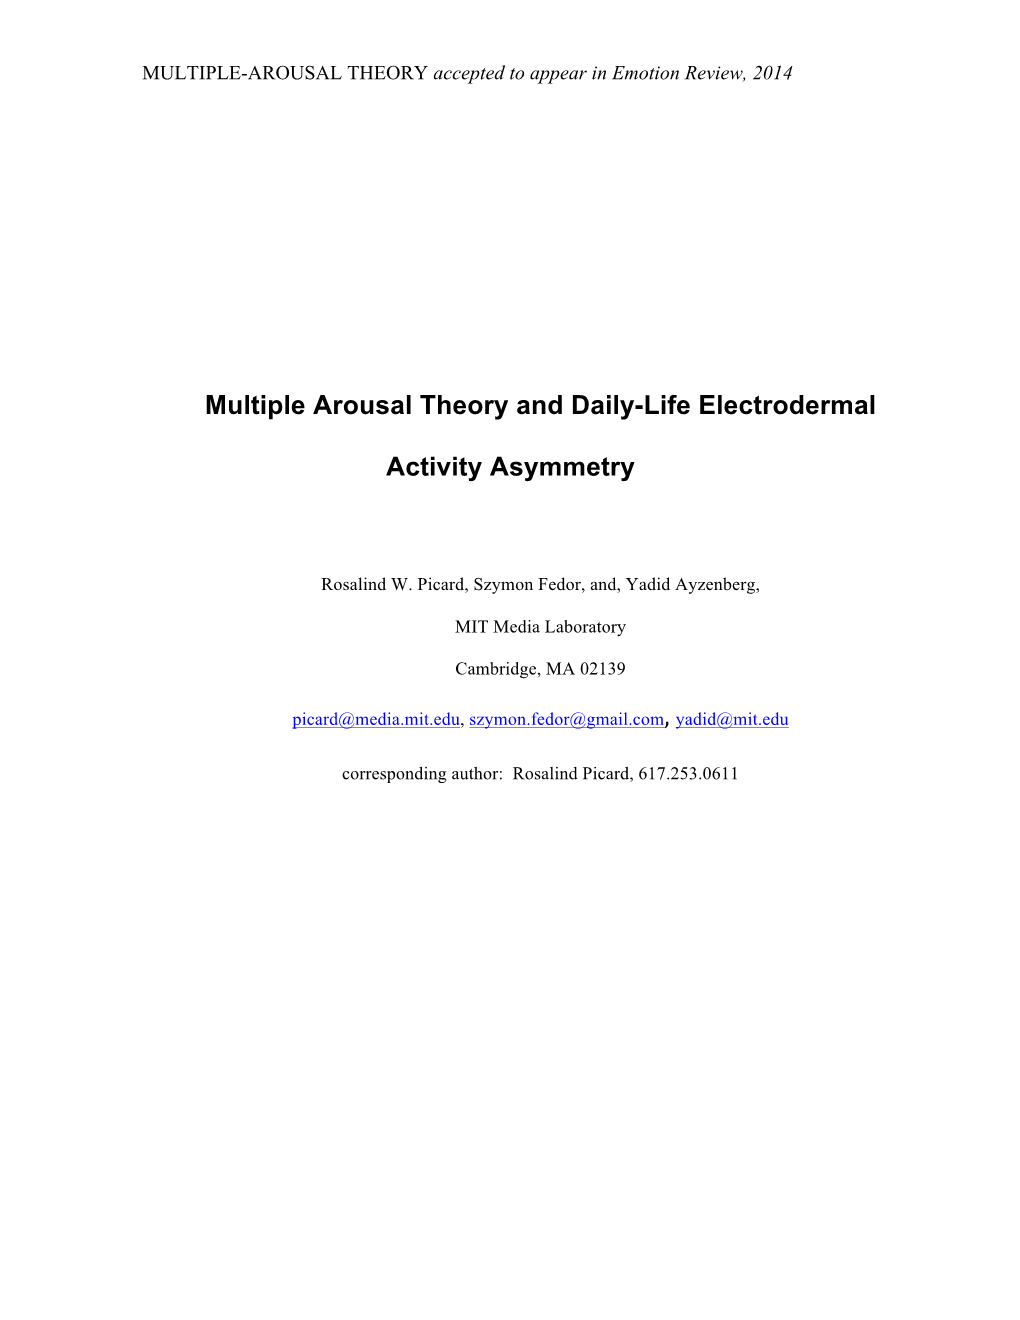 Multiple Arousal Theory and Daily-Life Electrodermal Activity Asymmetry